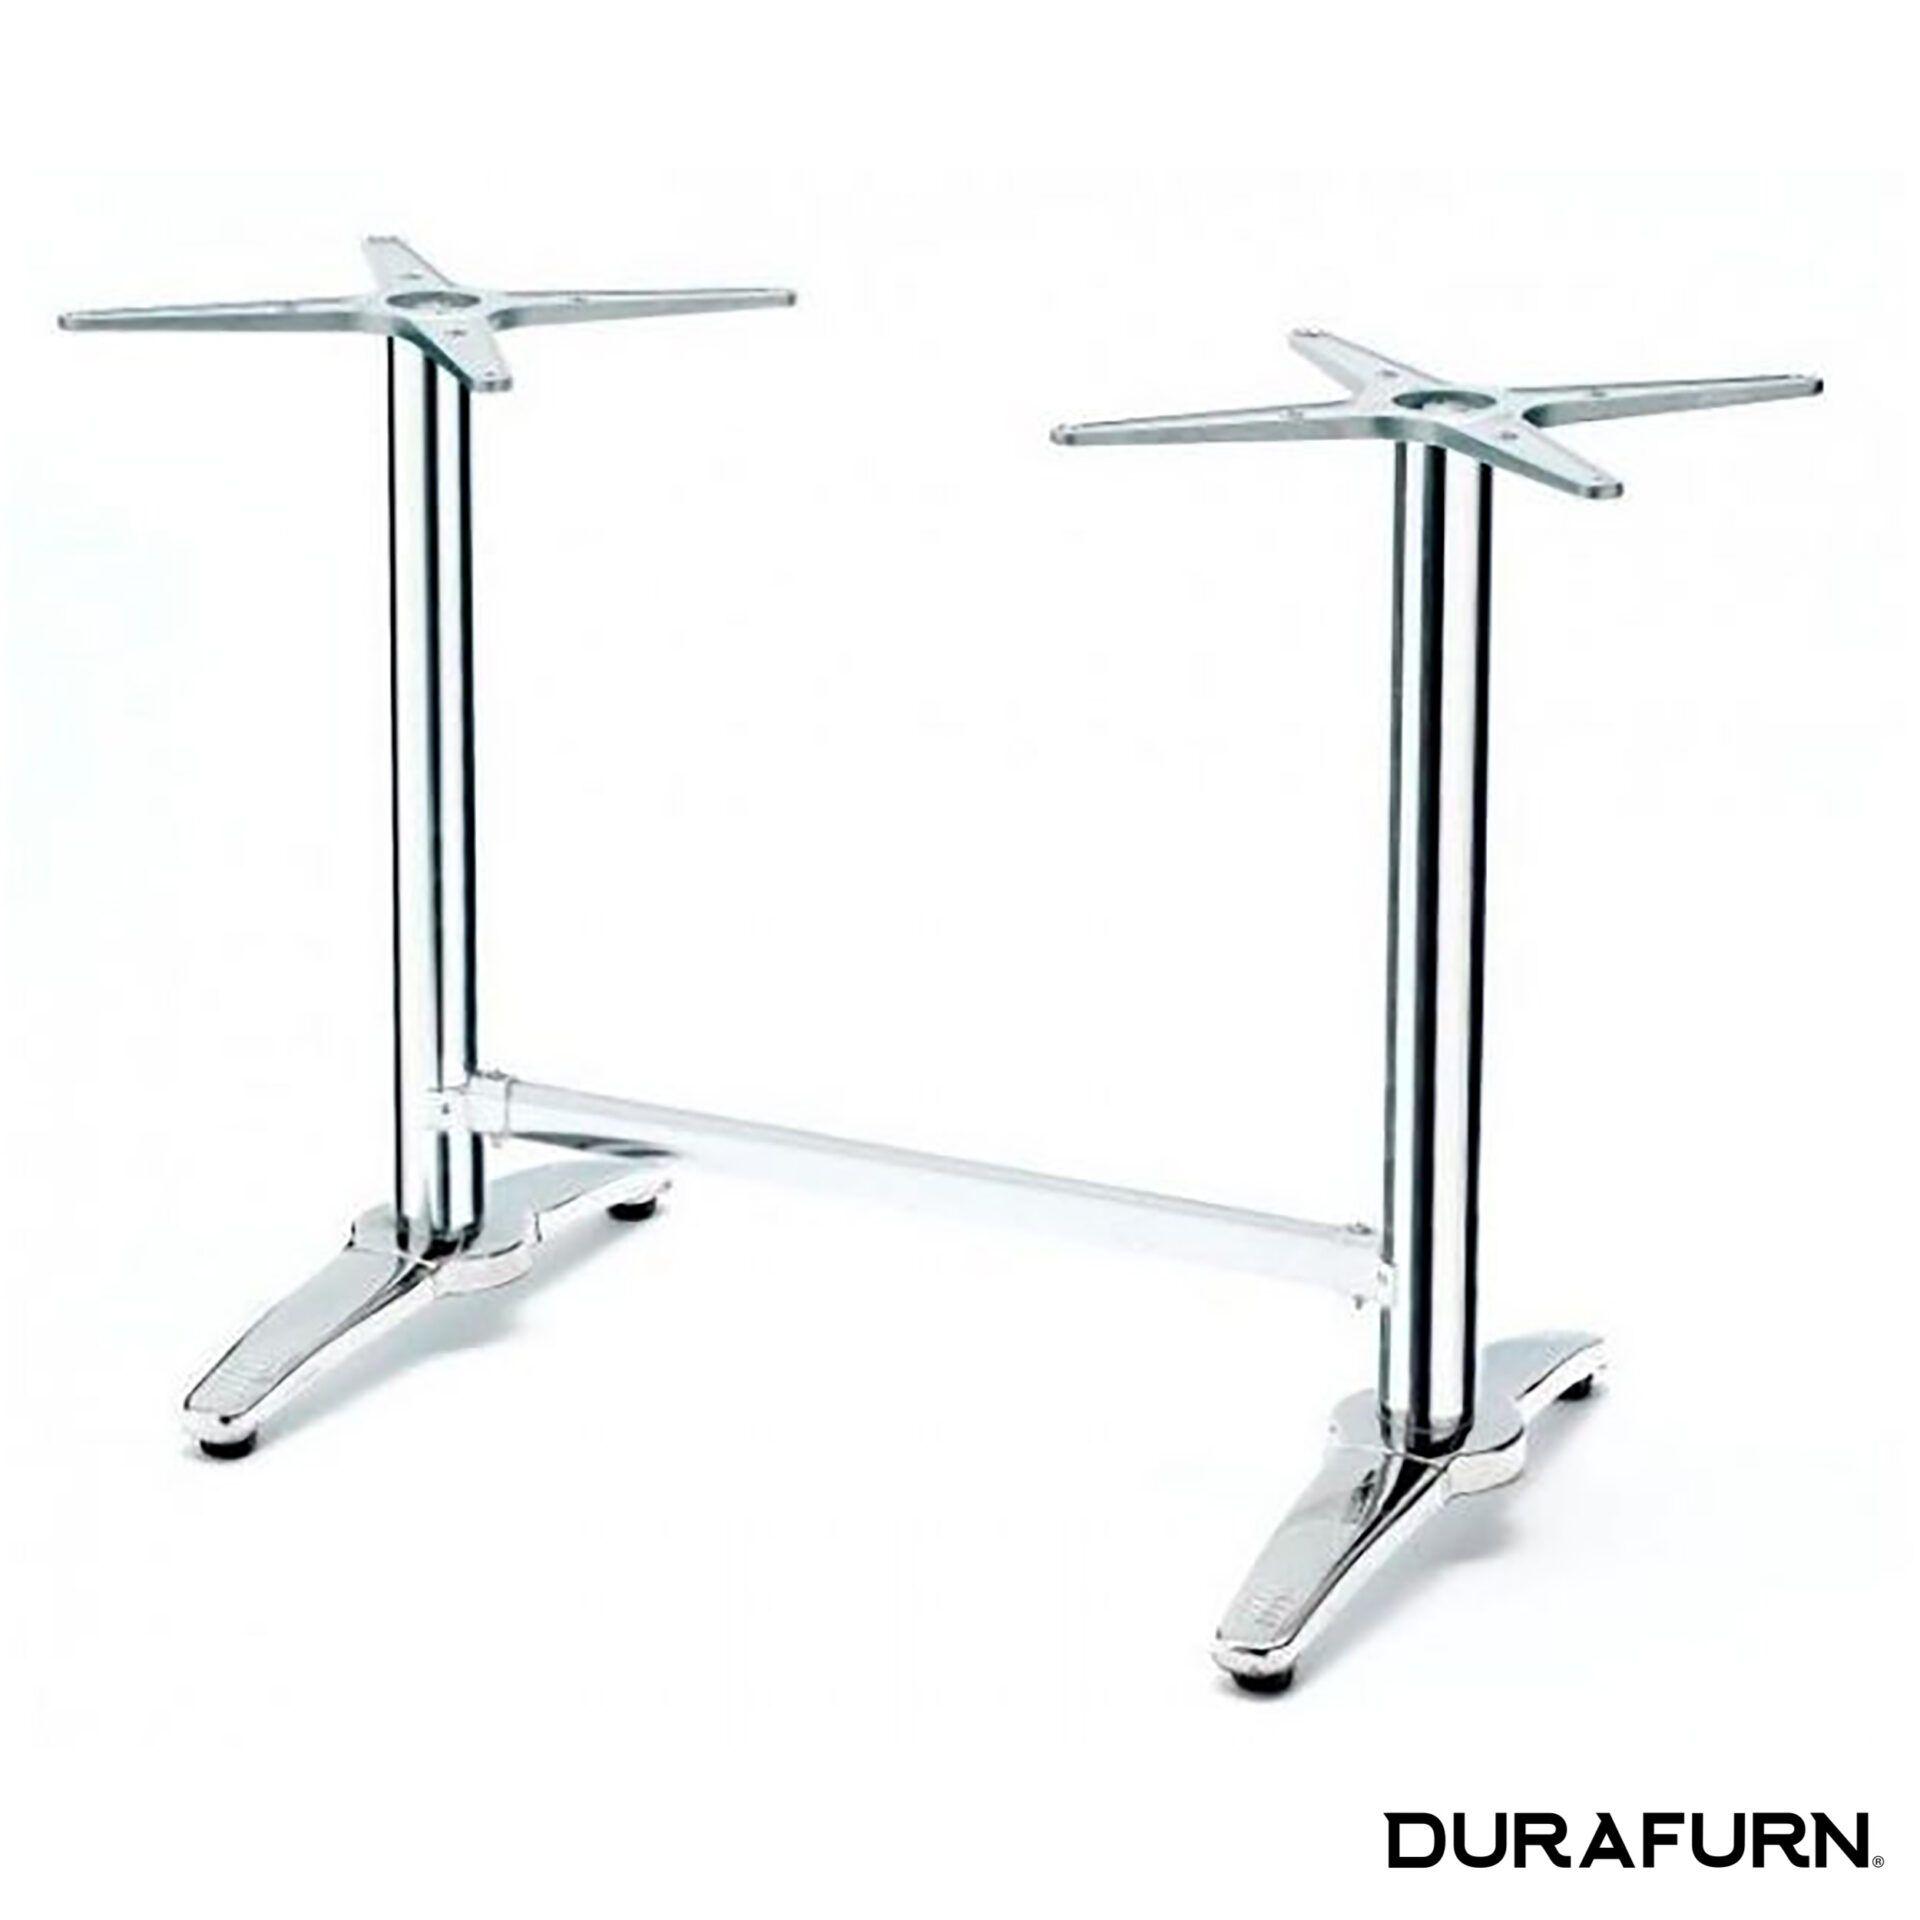 Product Roma Twin Table Base - Workspace Systems image